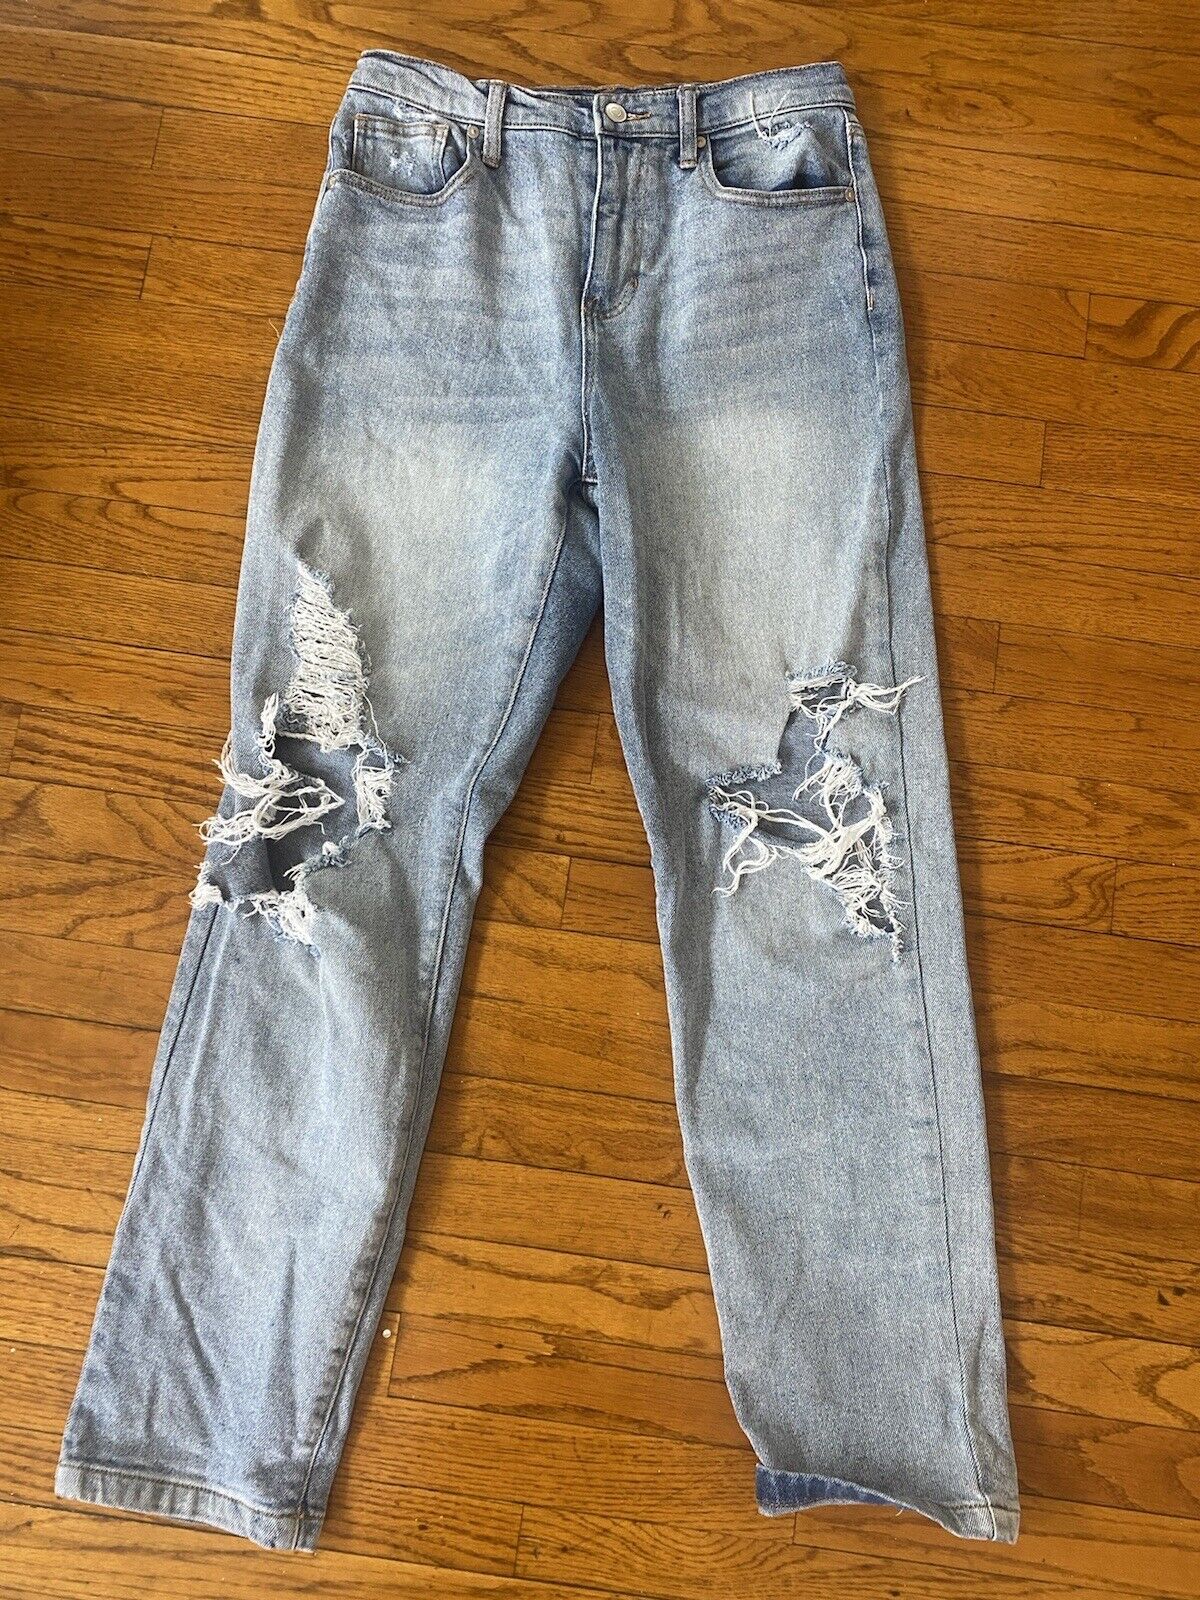 High Rise Distressed Jeans - Unbranded - Women's 7 # 2005